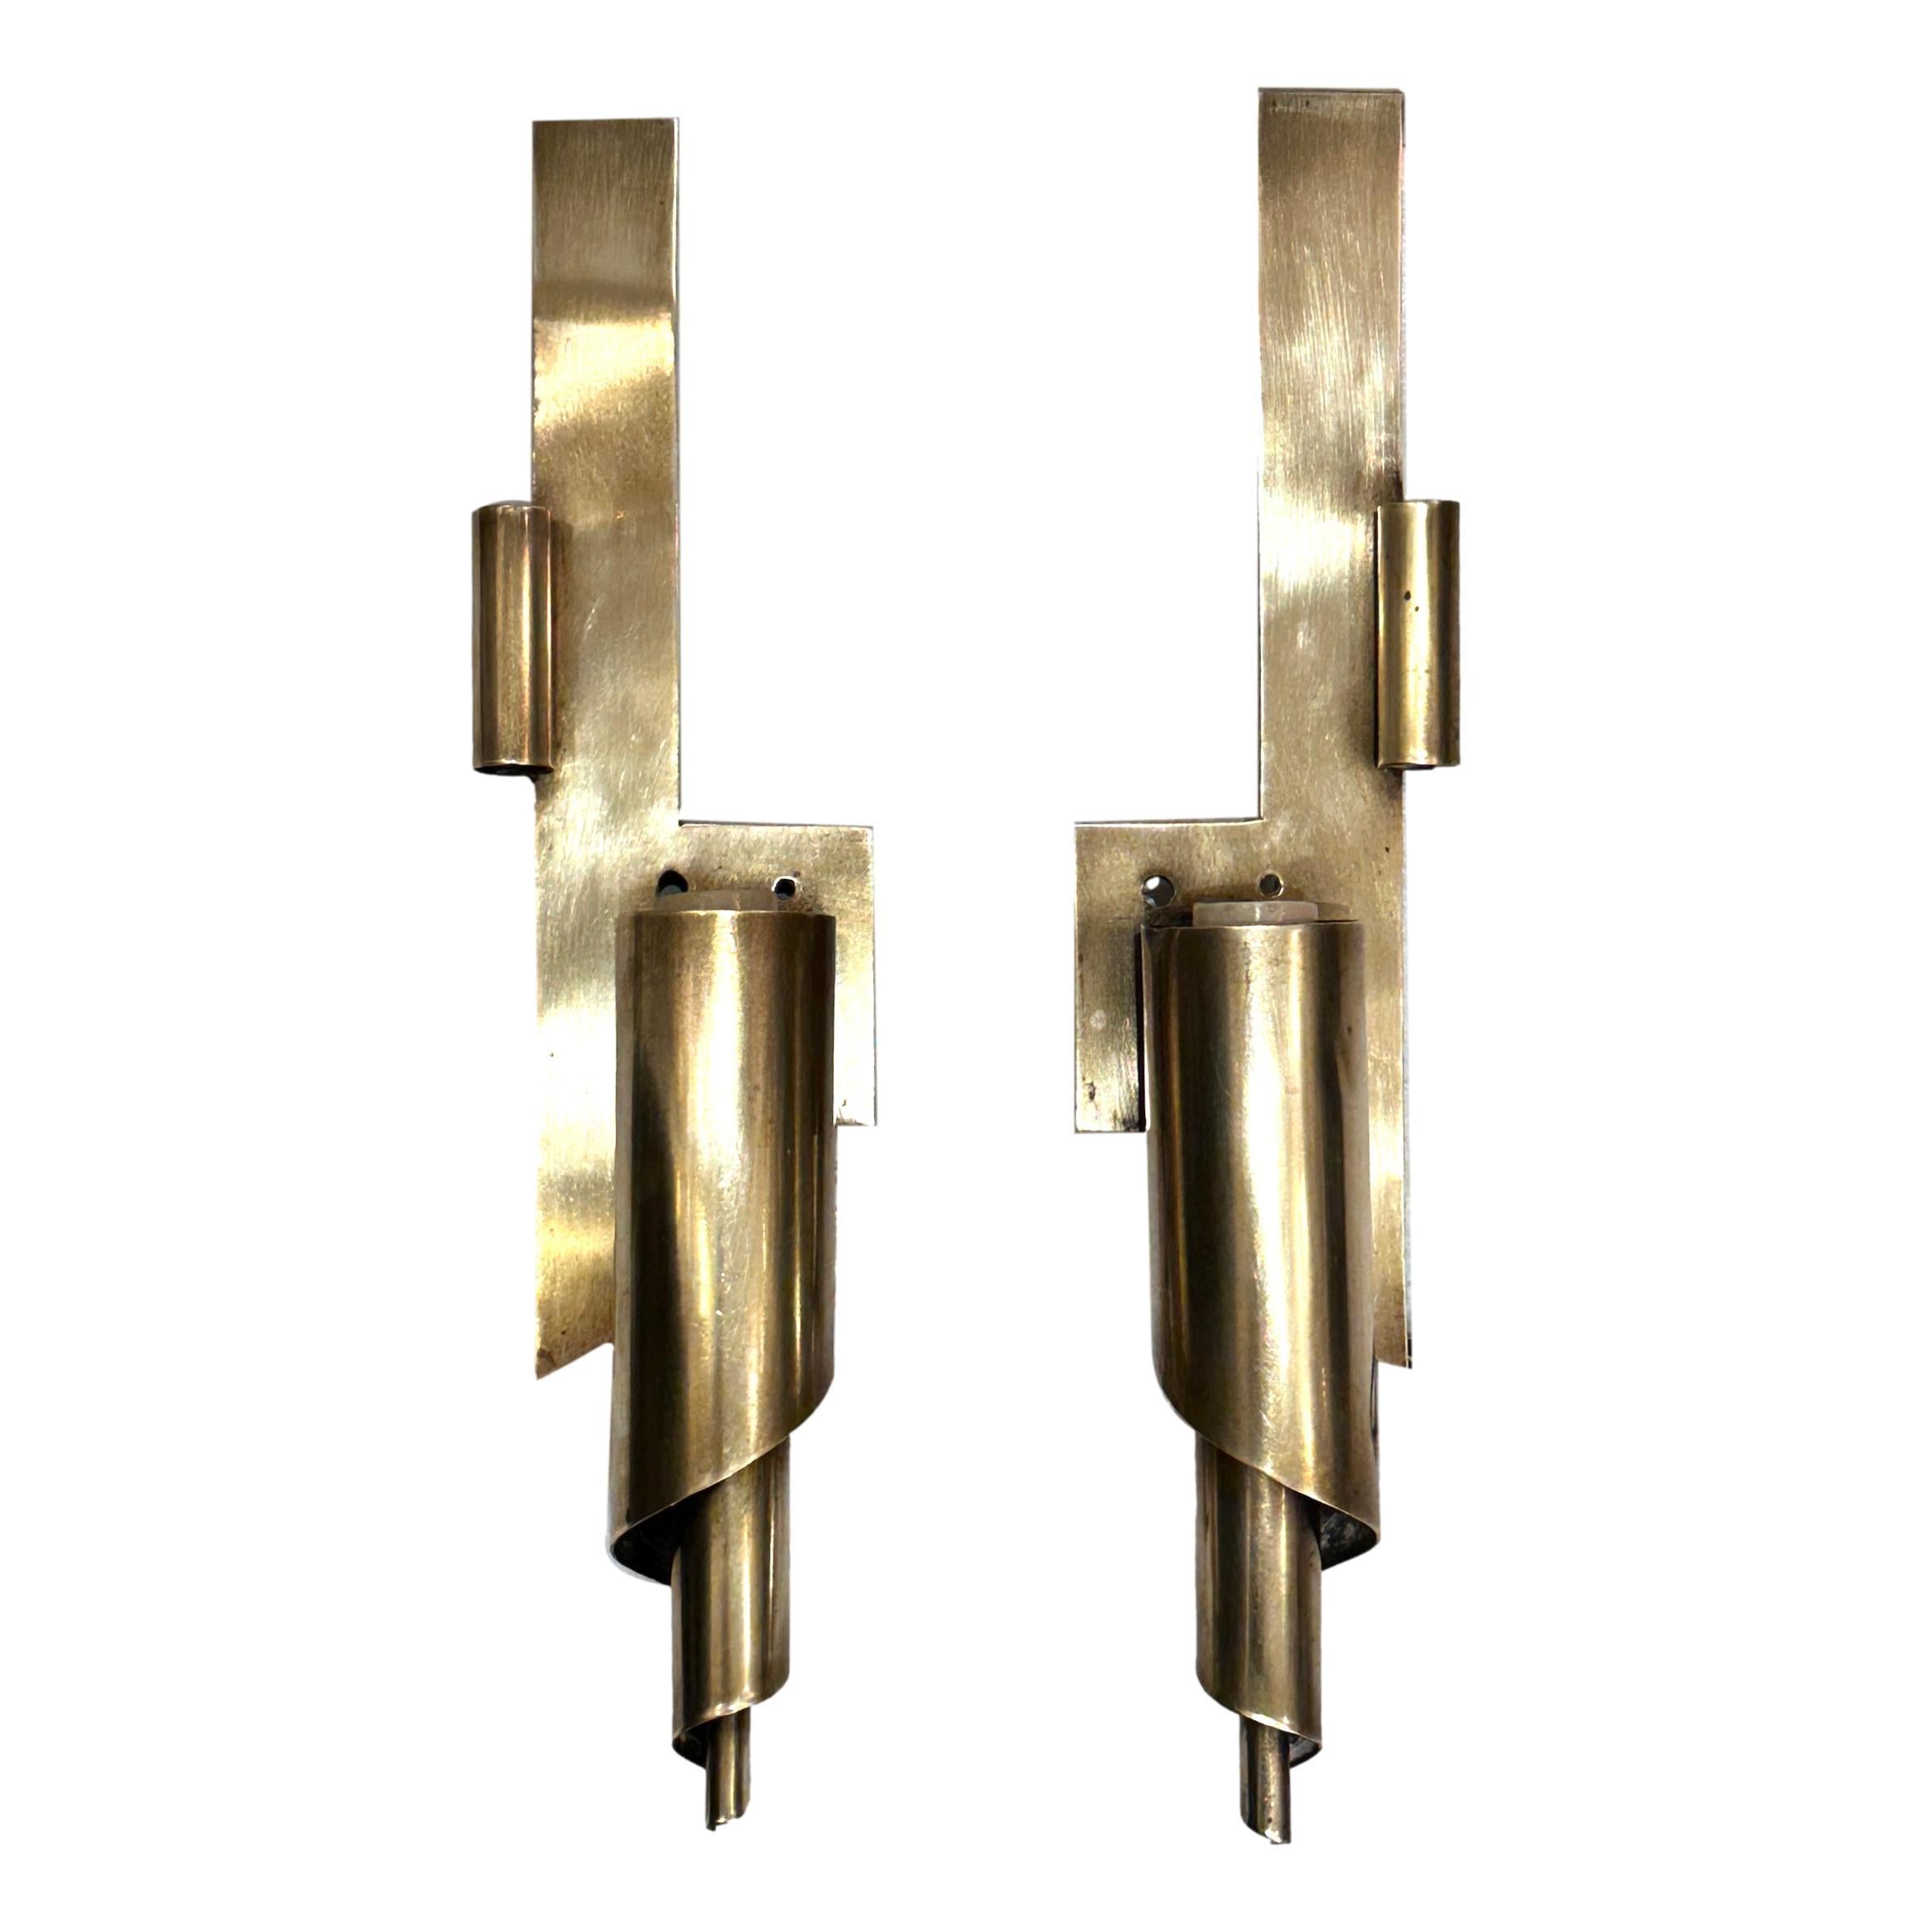 Pair of circa 1950's Italian patinated bronze sconces with single light.

Measurements:
Height: 12.5